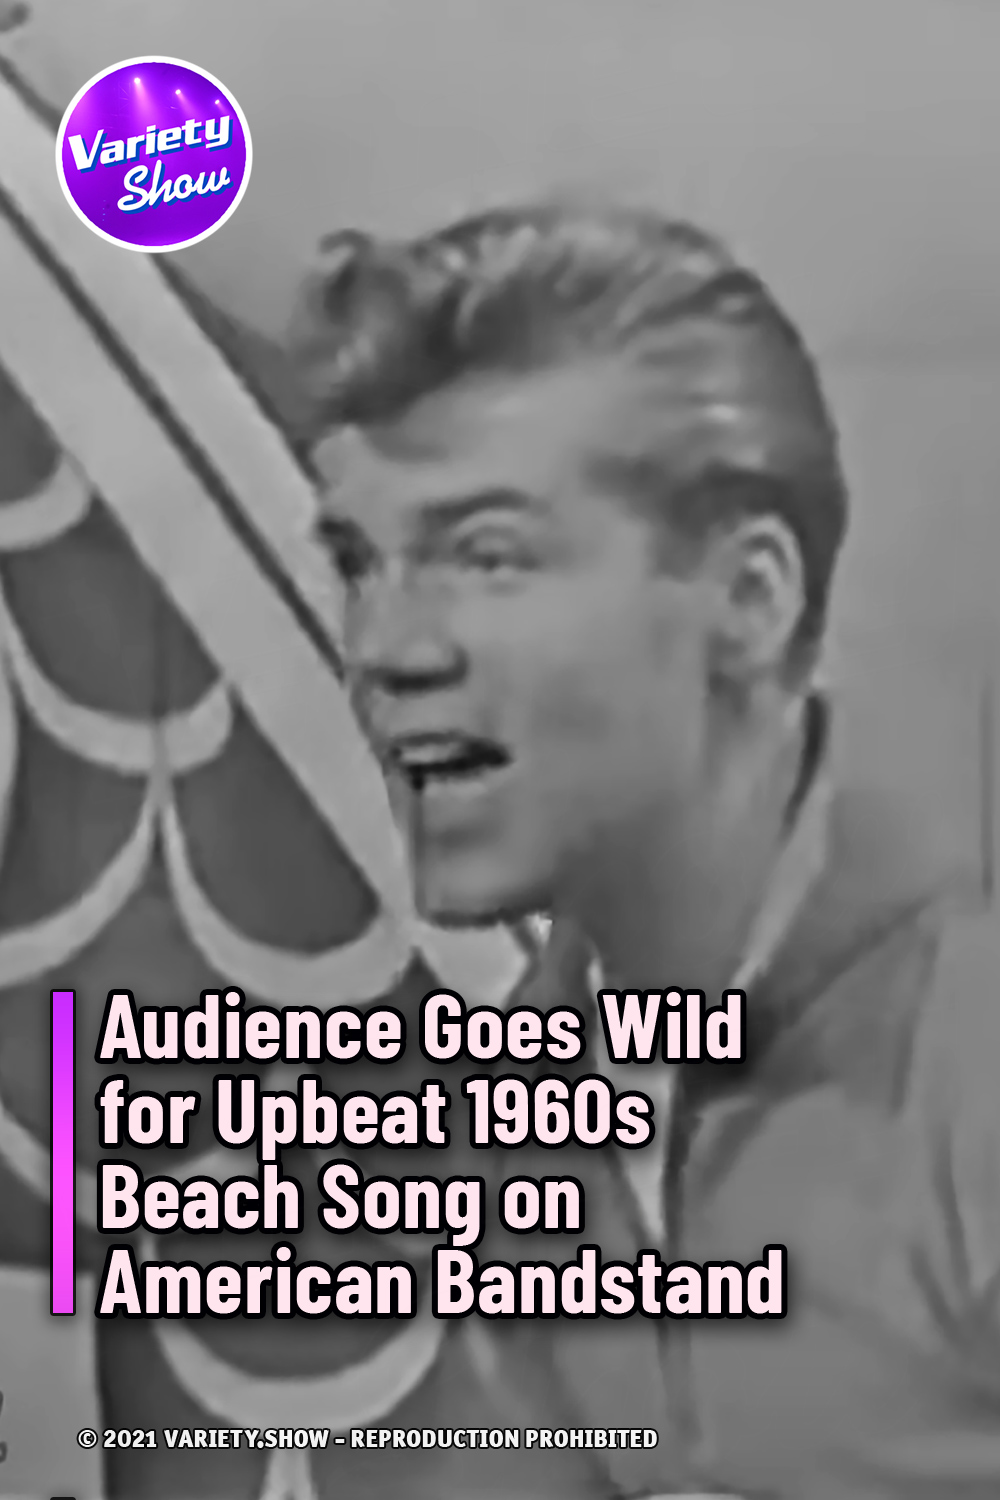 Audience Goes Wild for Upbeat 1960s Beach Song on American Bandstand